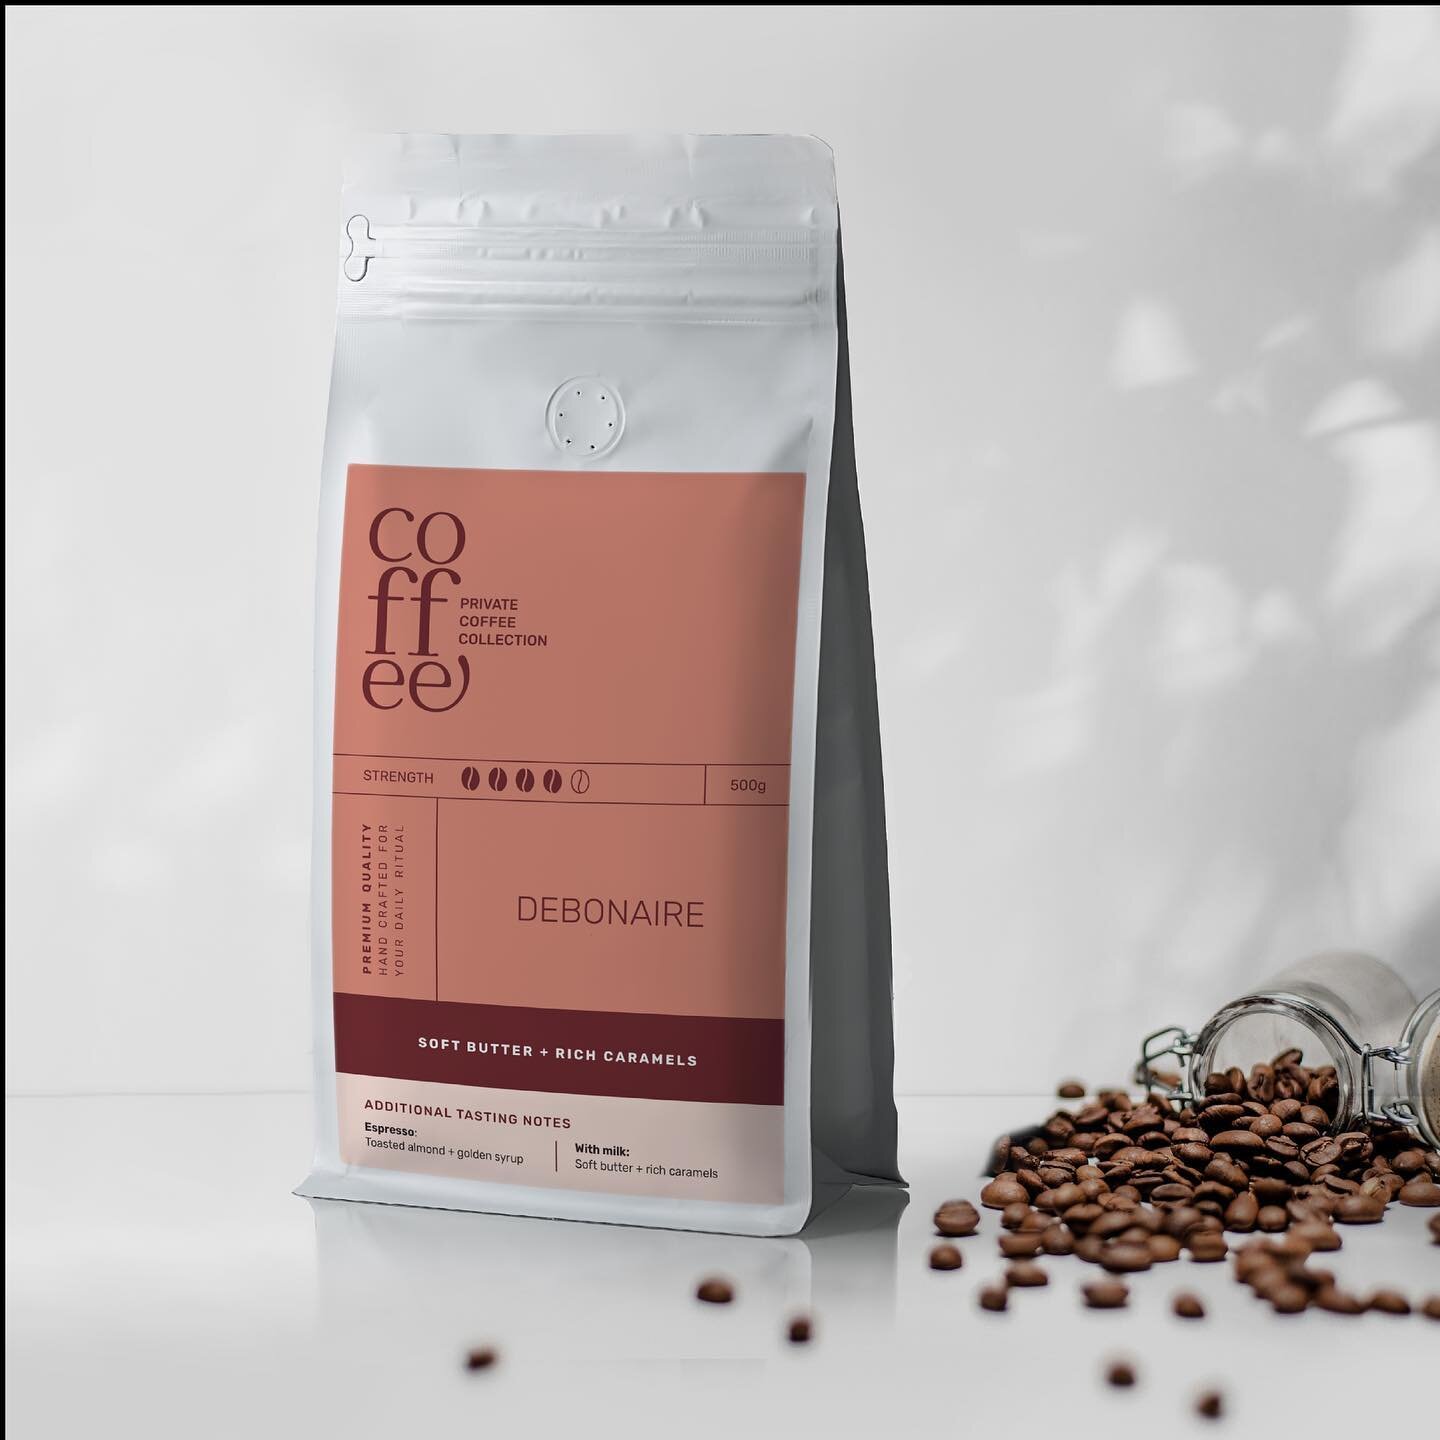 The brief was to elevate the design of an existing brand to reflect the premium quality coffee blends designed by Phillip Di Bella.

Elegant, yet modern and approachable.

Available exclusively from the cafe at Coffee Commune in Bowen Hills.

TESTIMO